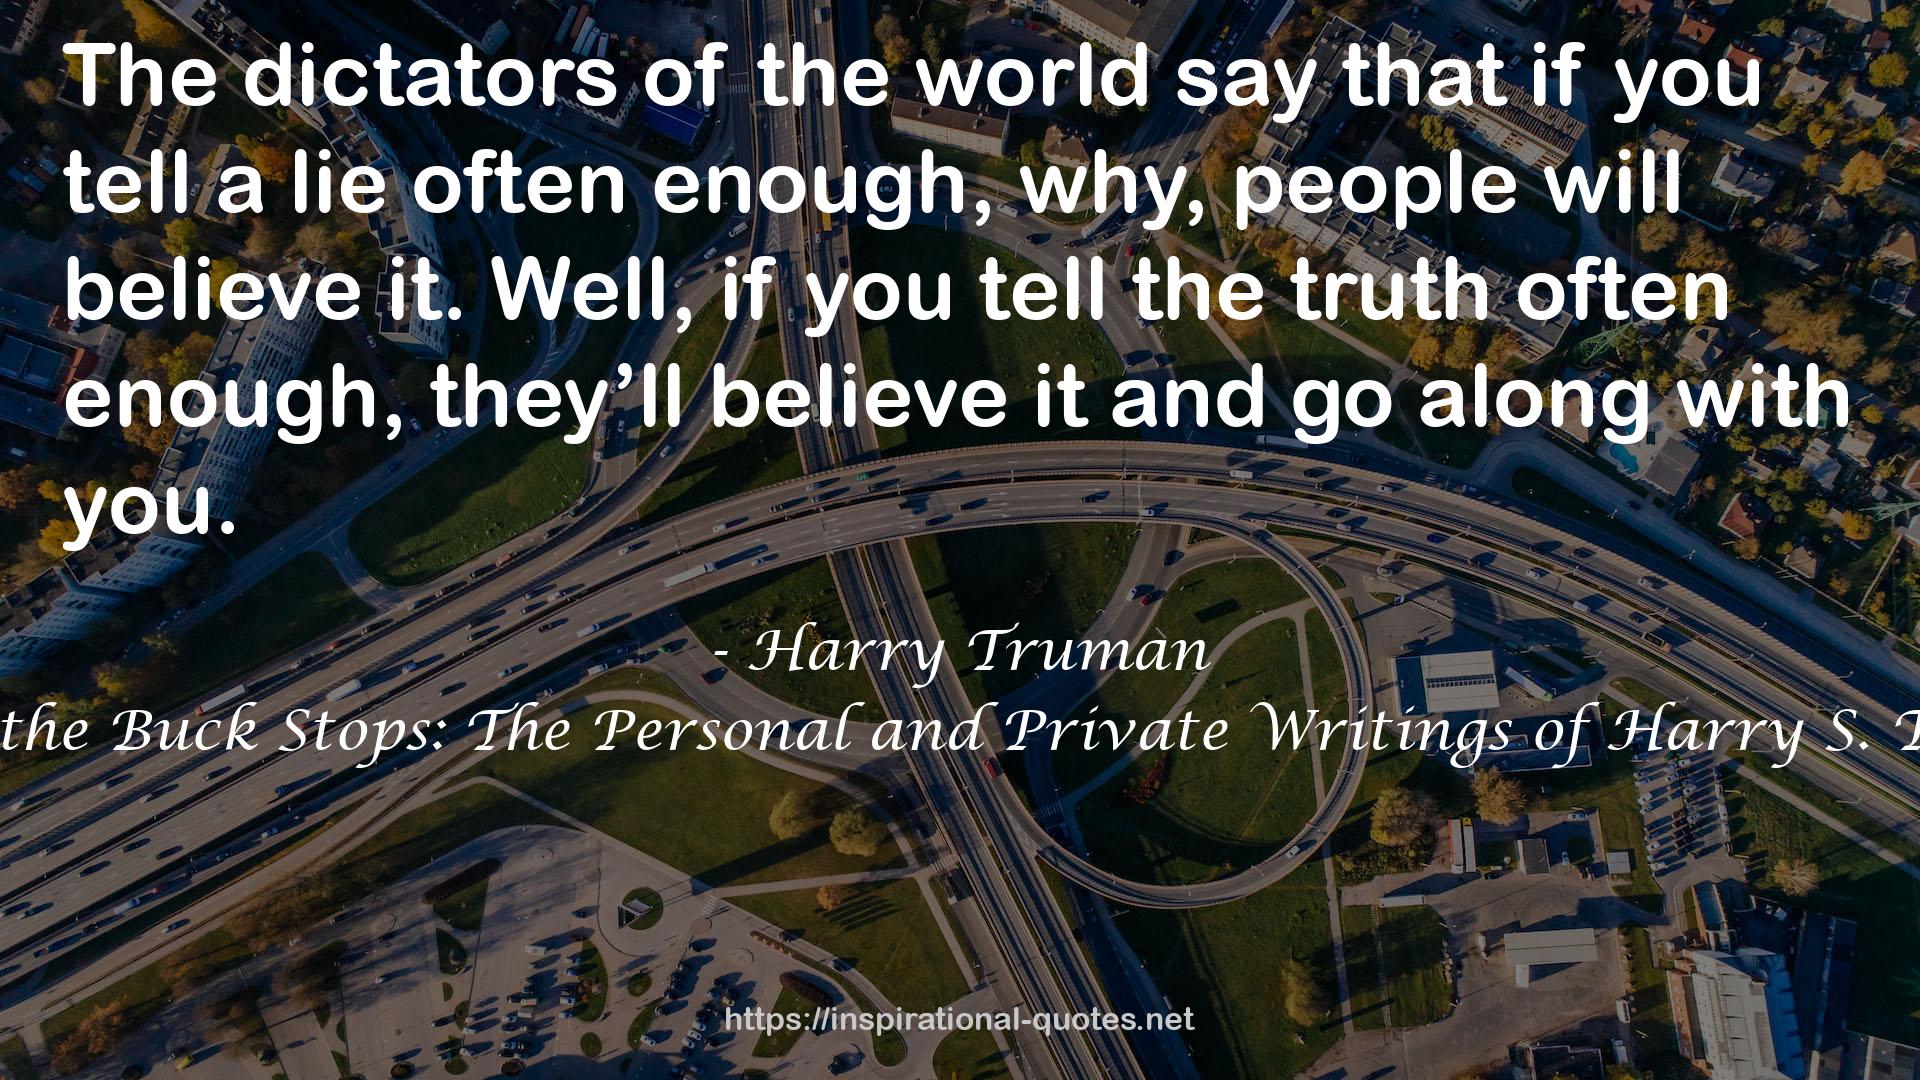 Where the Buck Stops: The Personal and Private Writings of Harry S. Truman QUOTES